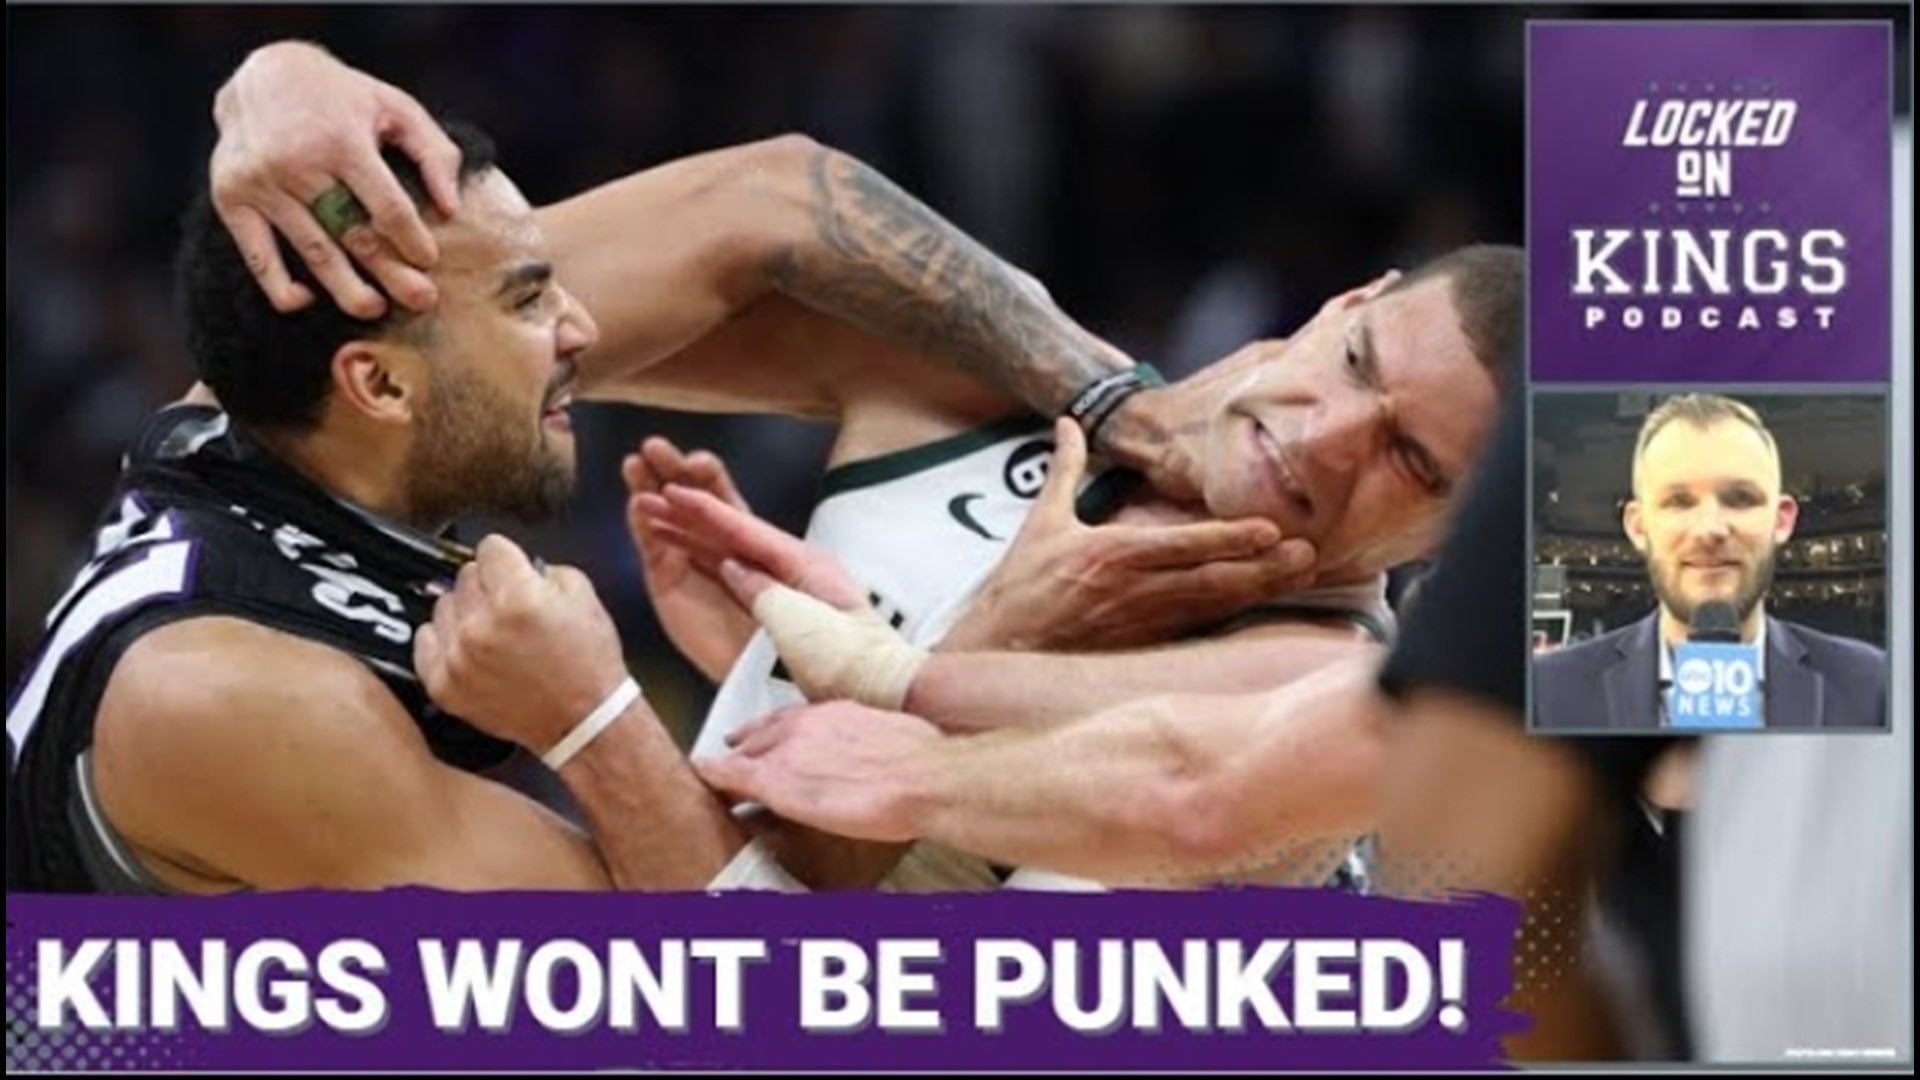 The Kings' battle with the Milwaukee Bucks included a scrap and ejections. Plus, Mike Brown says he likes Dungeons & Dragons!